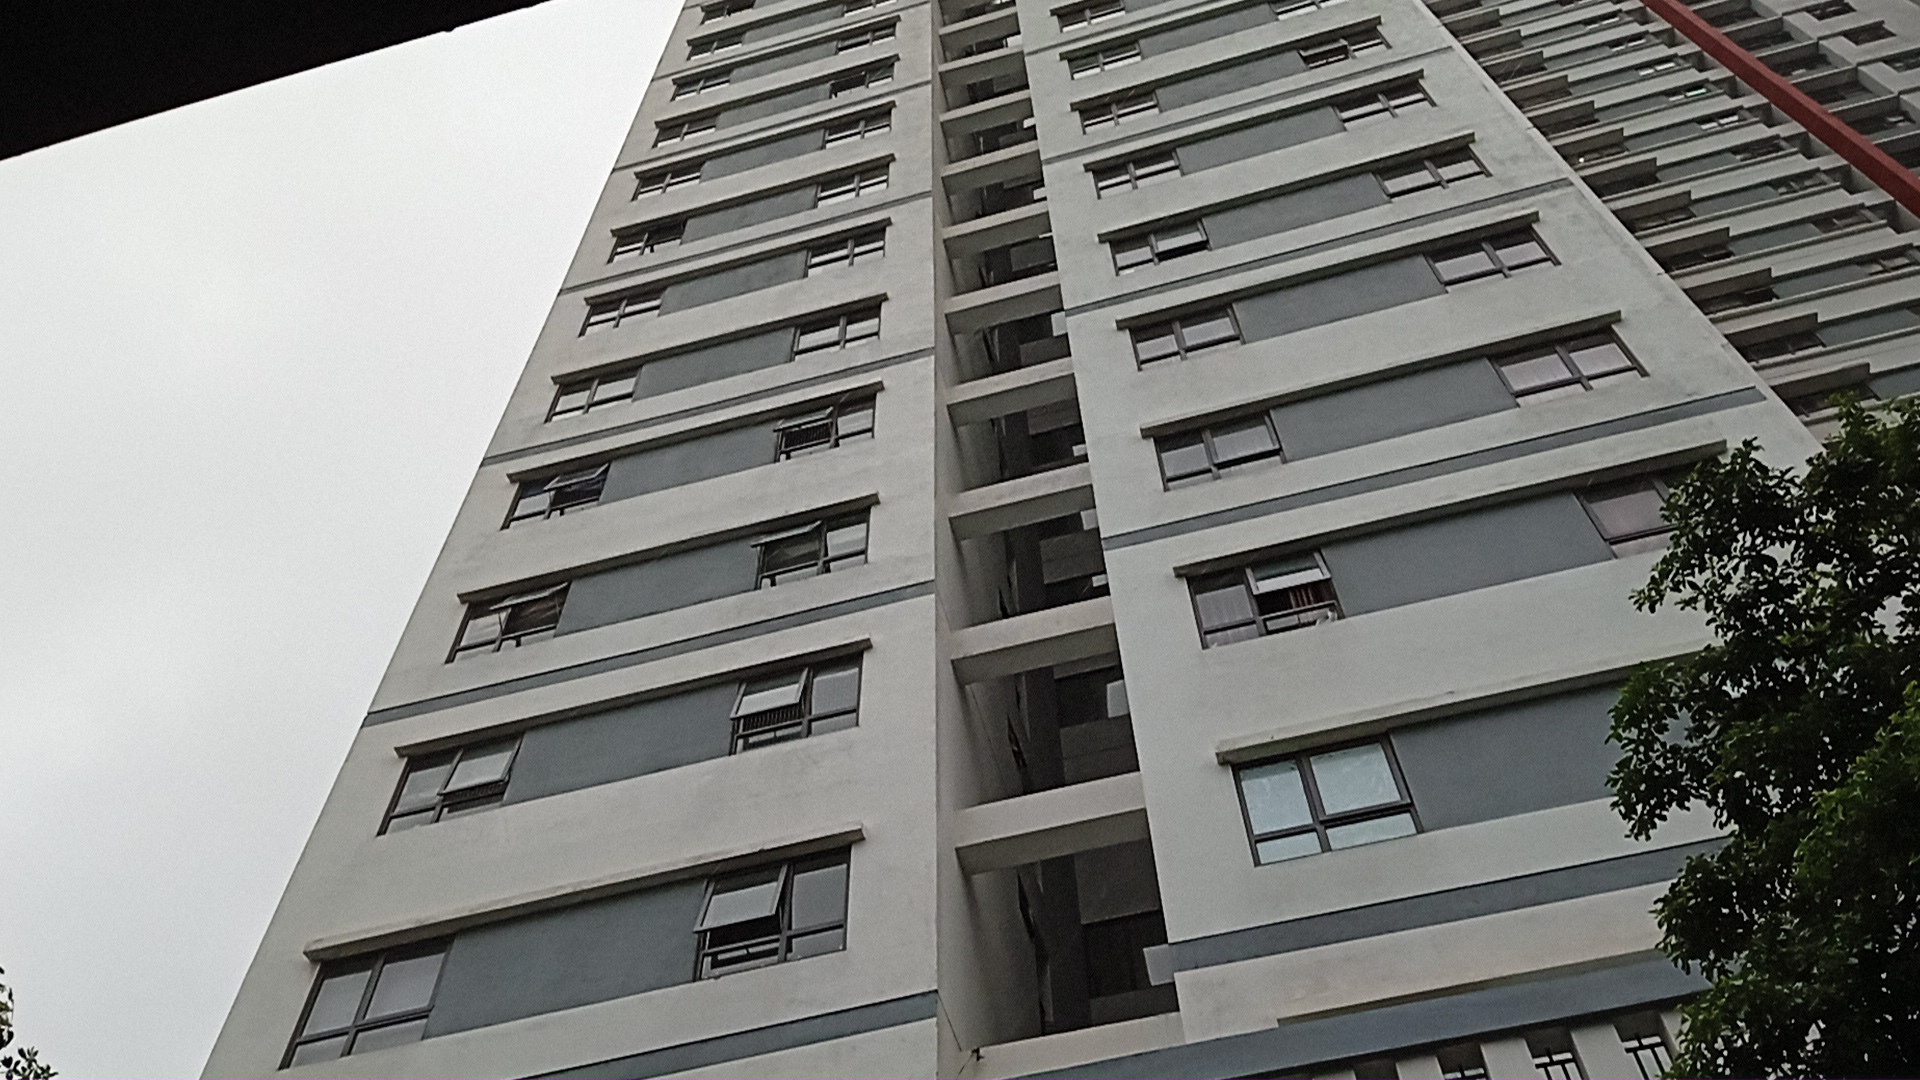 3-year-old boy dies after falling from sixth to third floor at Hanoi apartment building